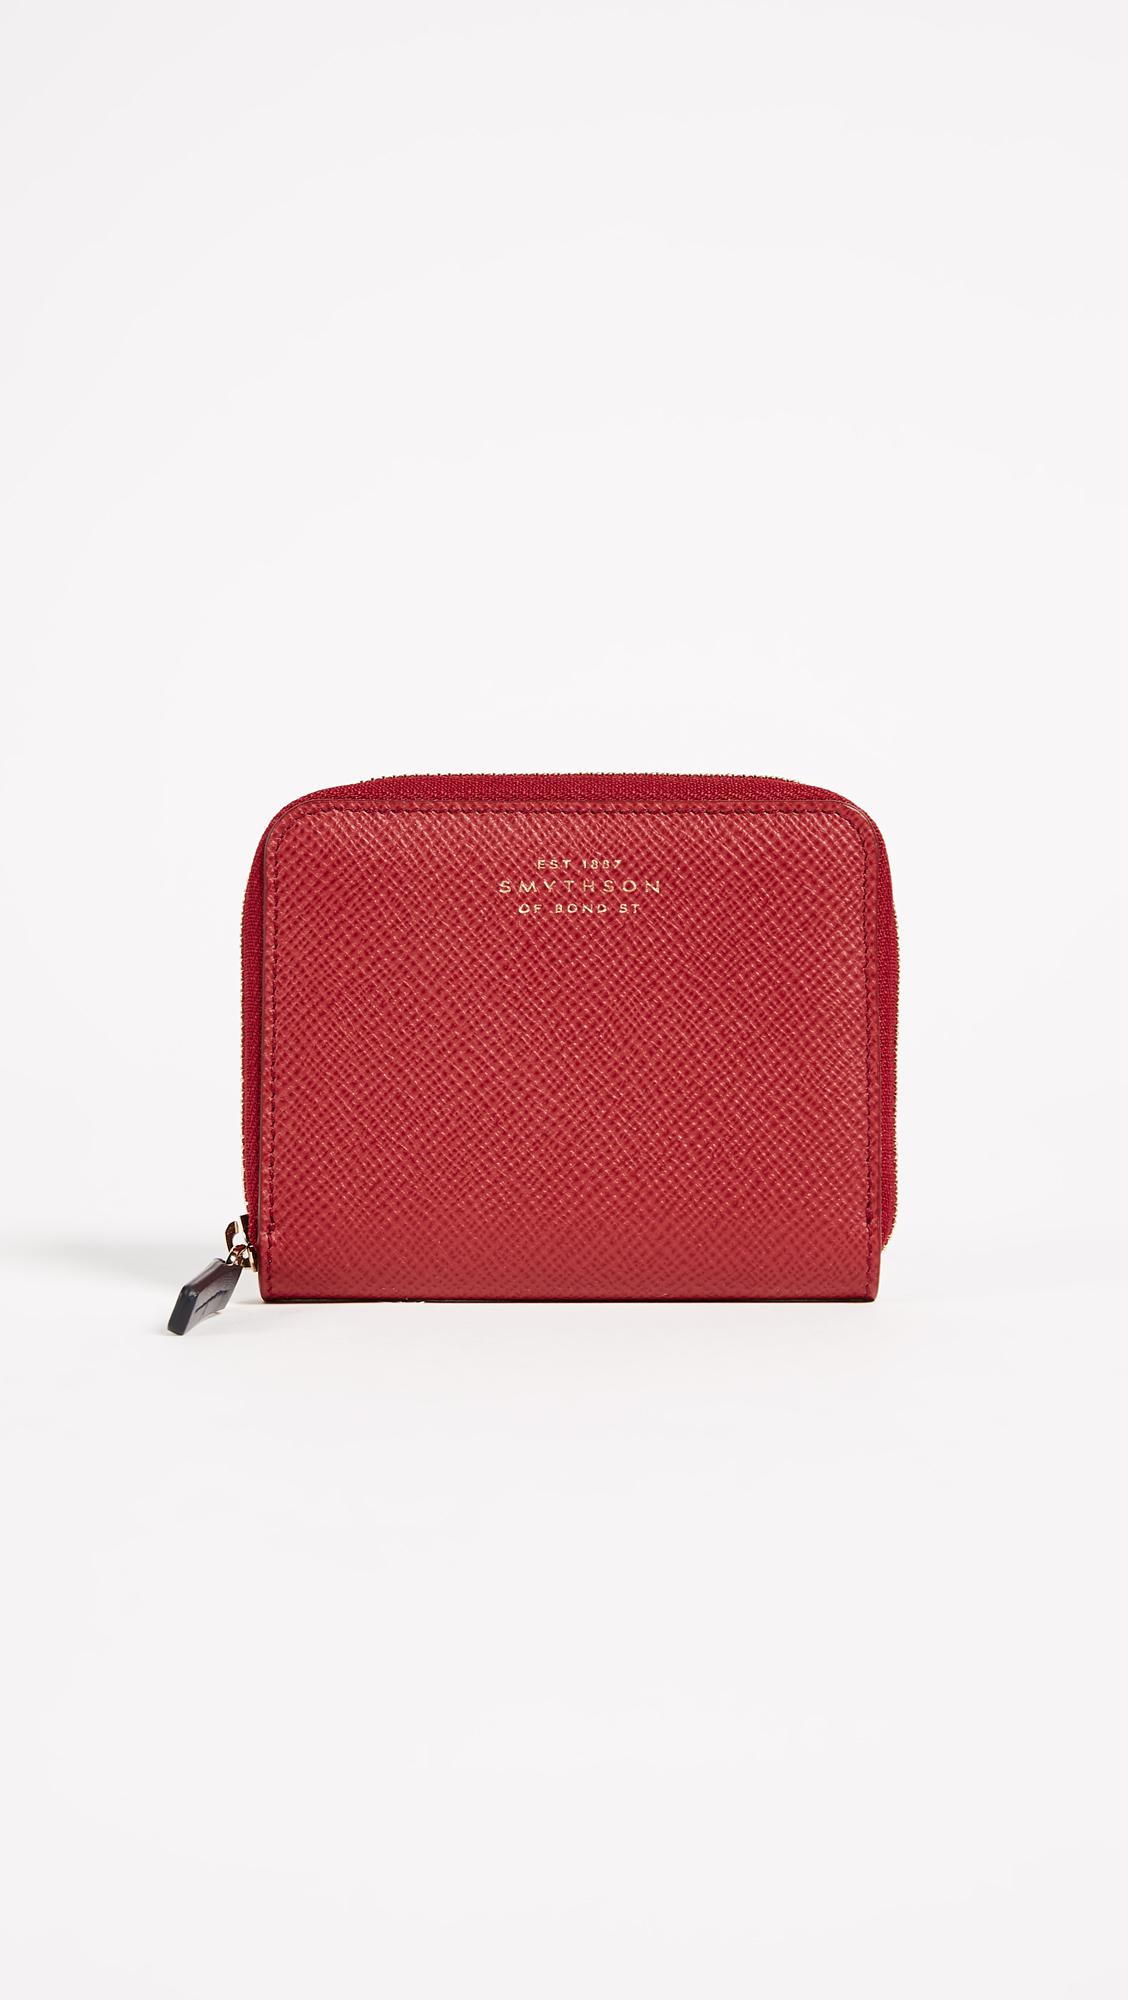 Smythson Leather Panama Zip Coin Purse in Red - Lyst